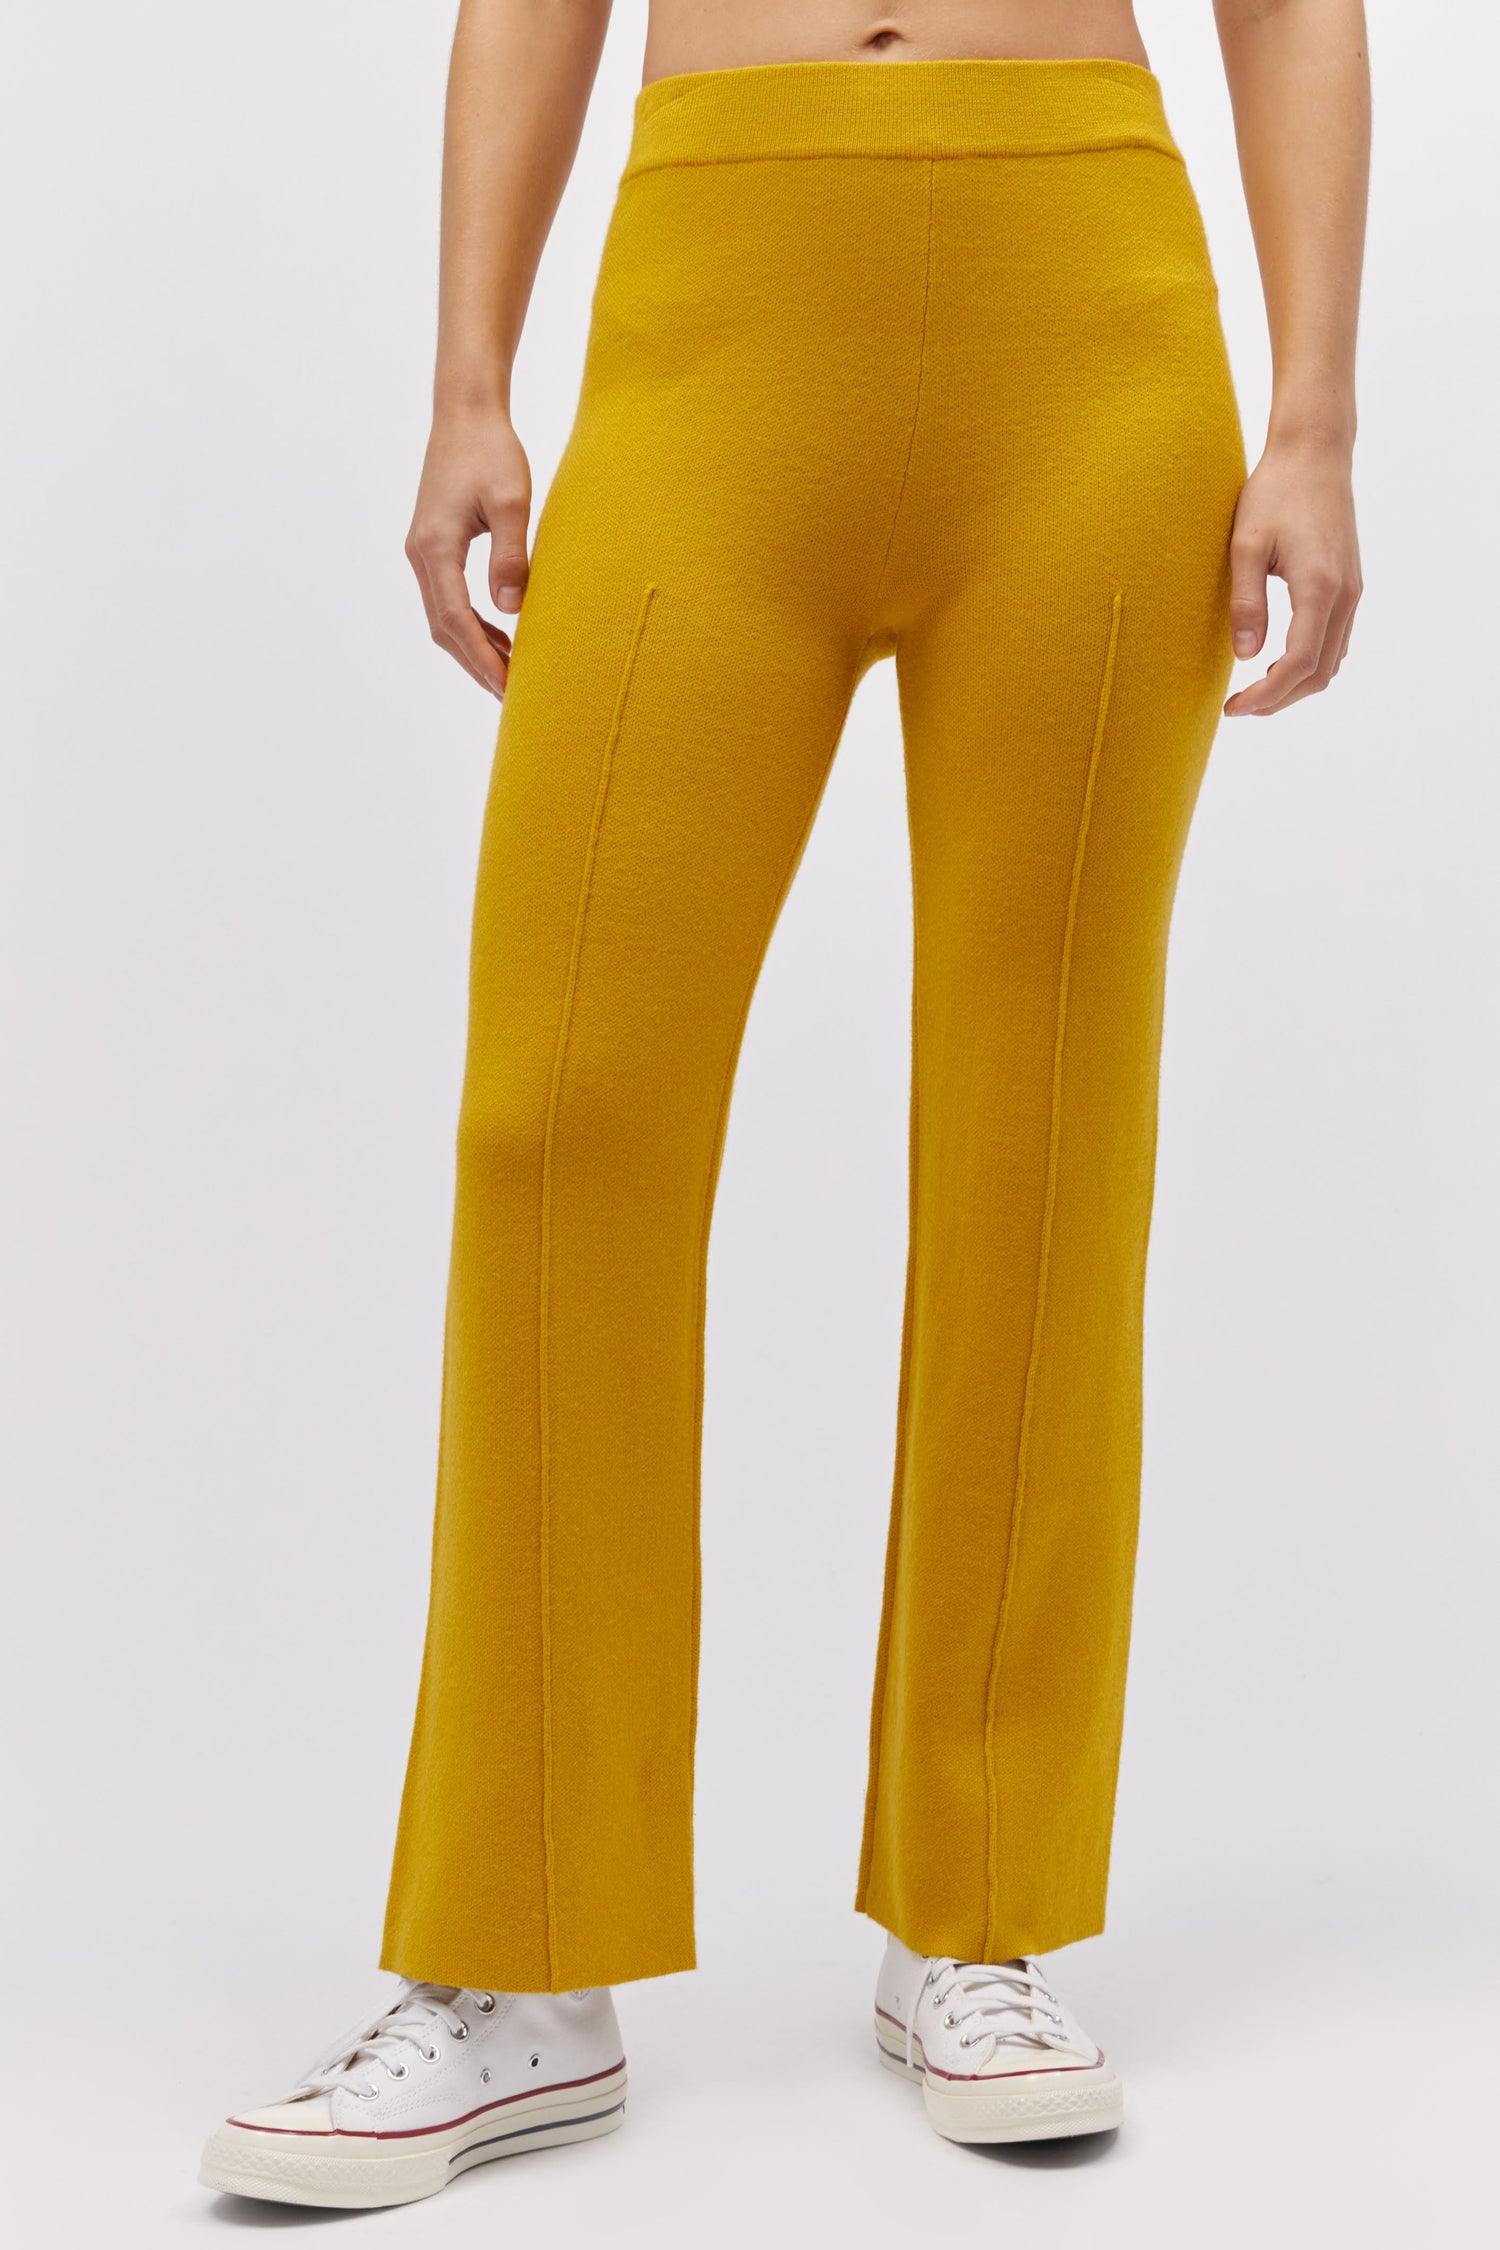 Knit Pintuck Pant in Gold